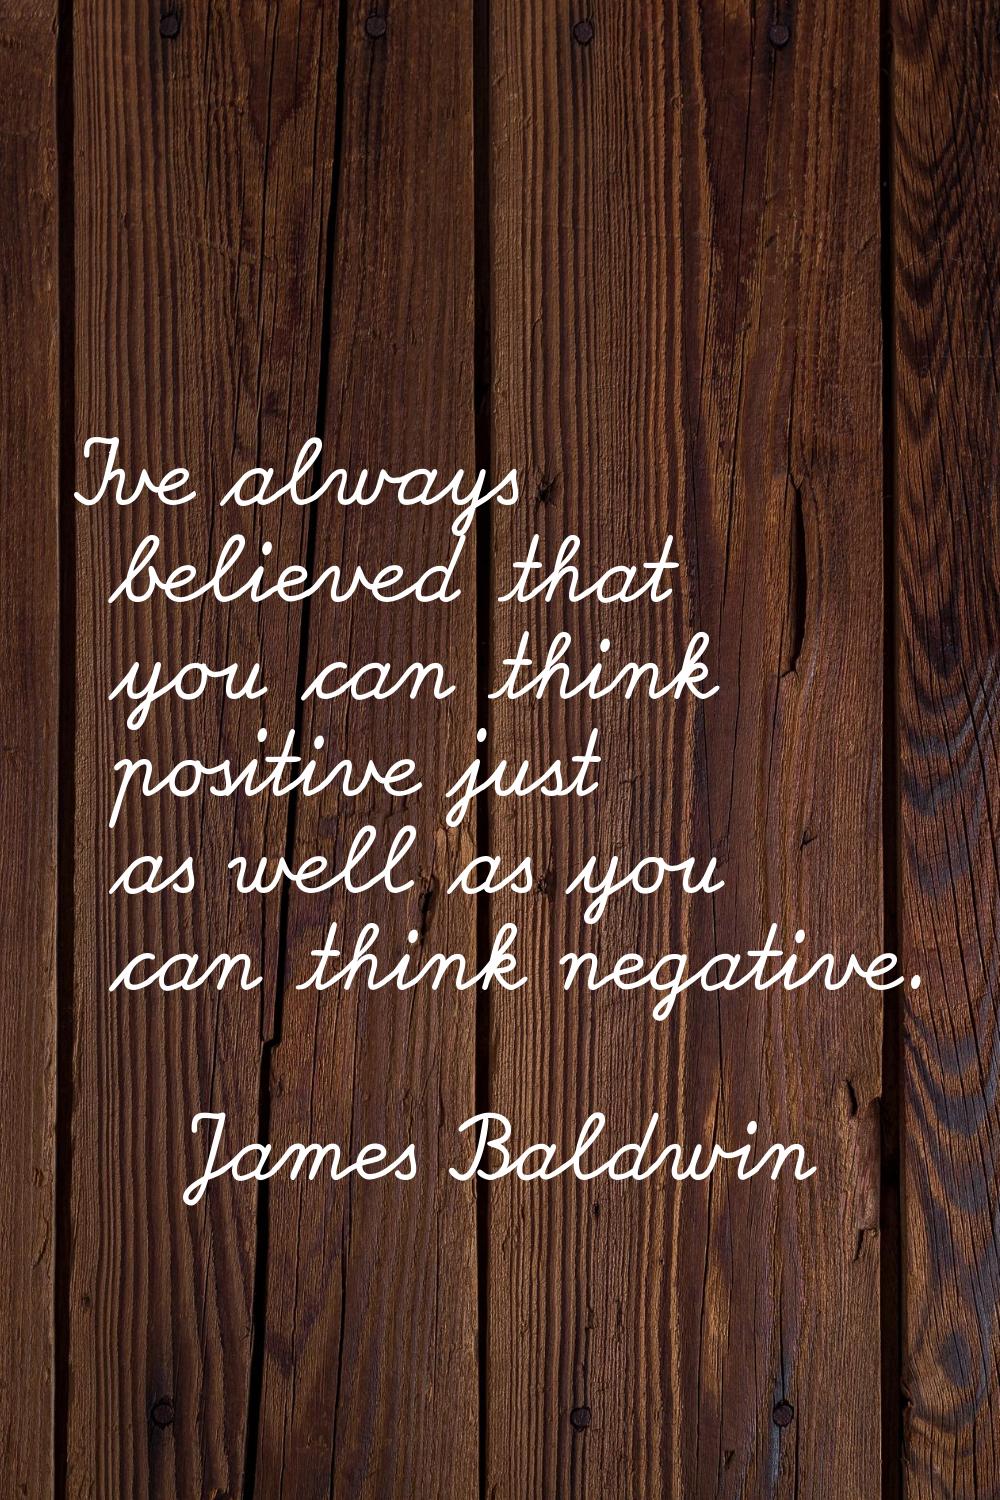 I've always believed that you can think positive just as well as you can think negative.